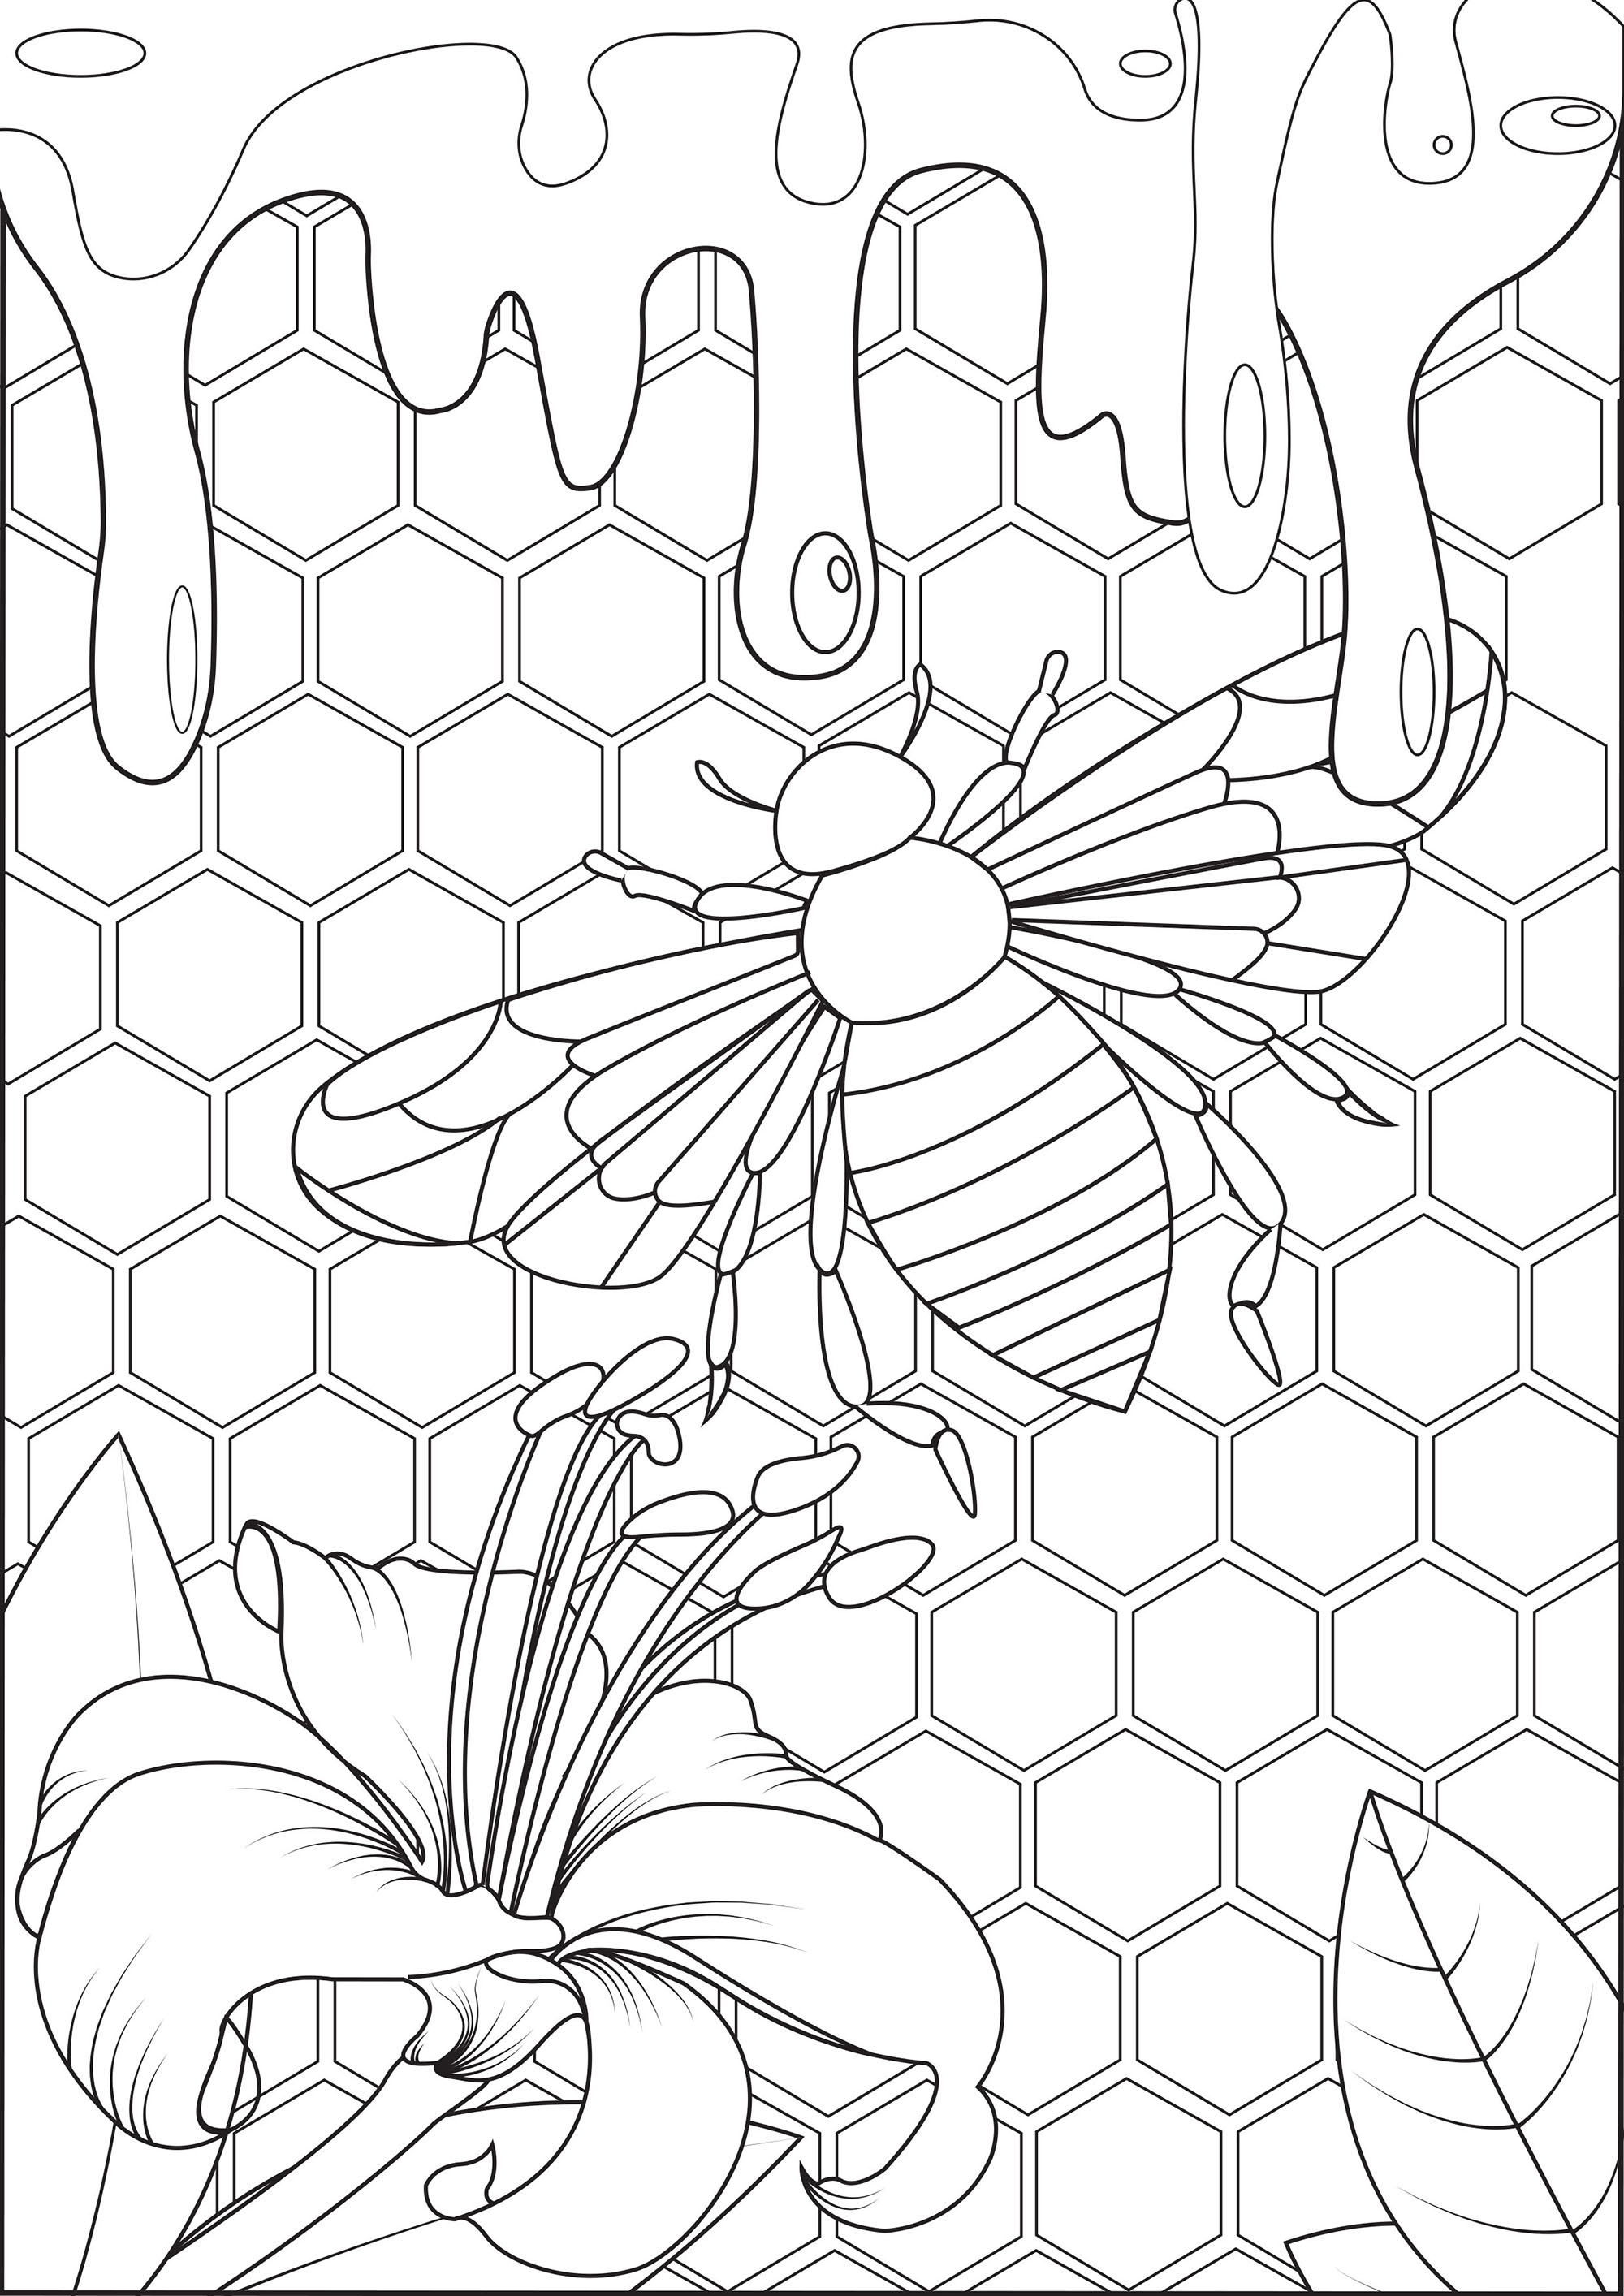 Dive into the heart of the beehive and taste this fresh honey!. This coloring page is an invitation to dive into the world of bees and discover their world .., Artist : Arwen